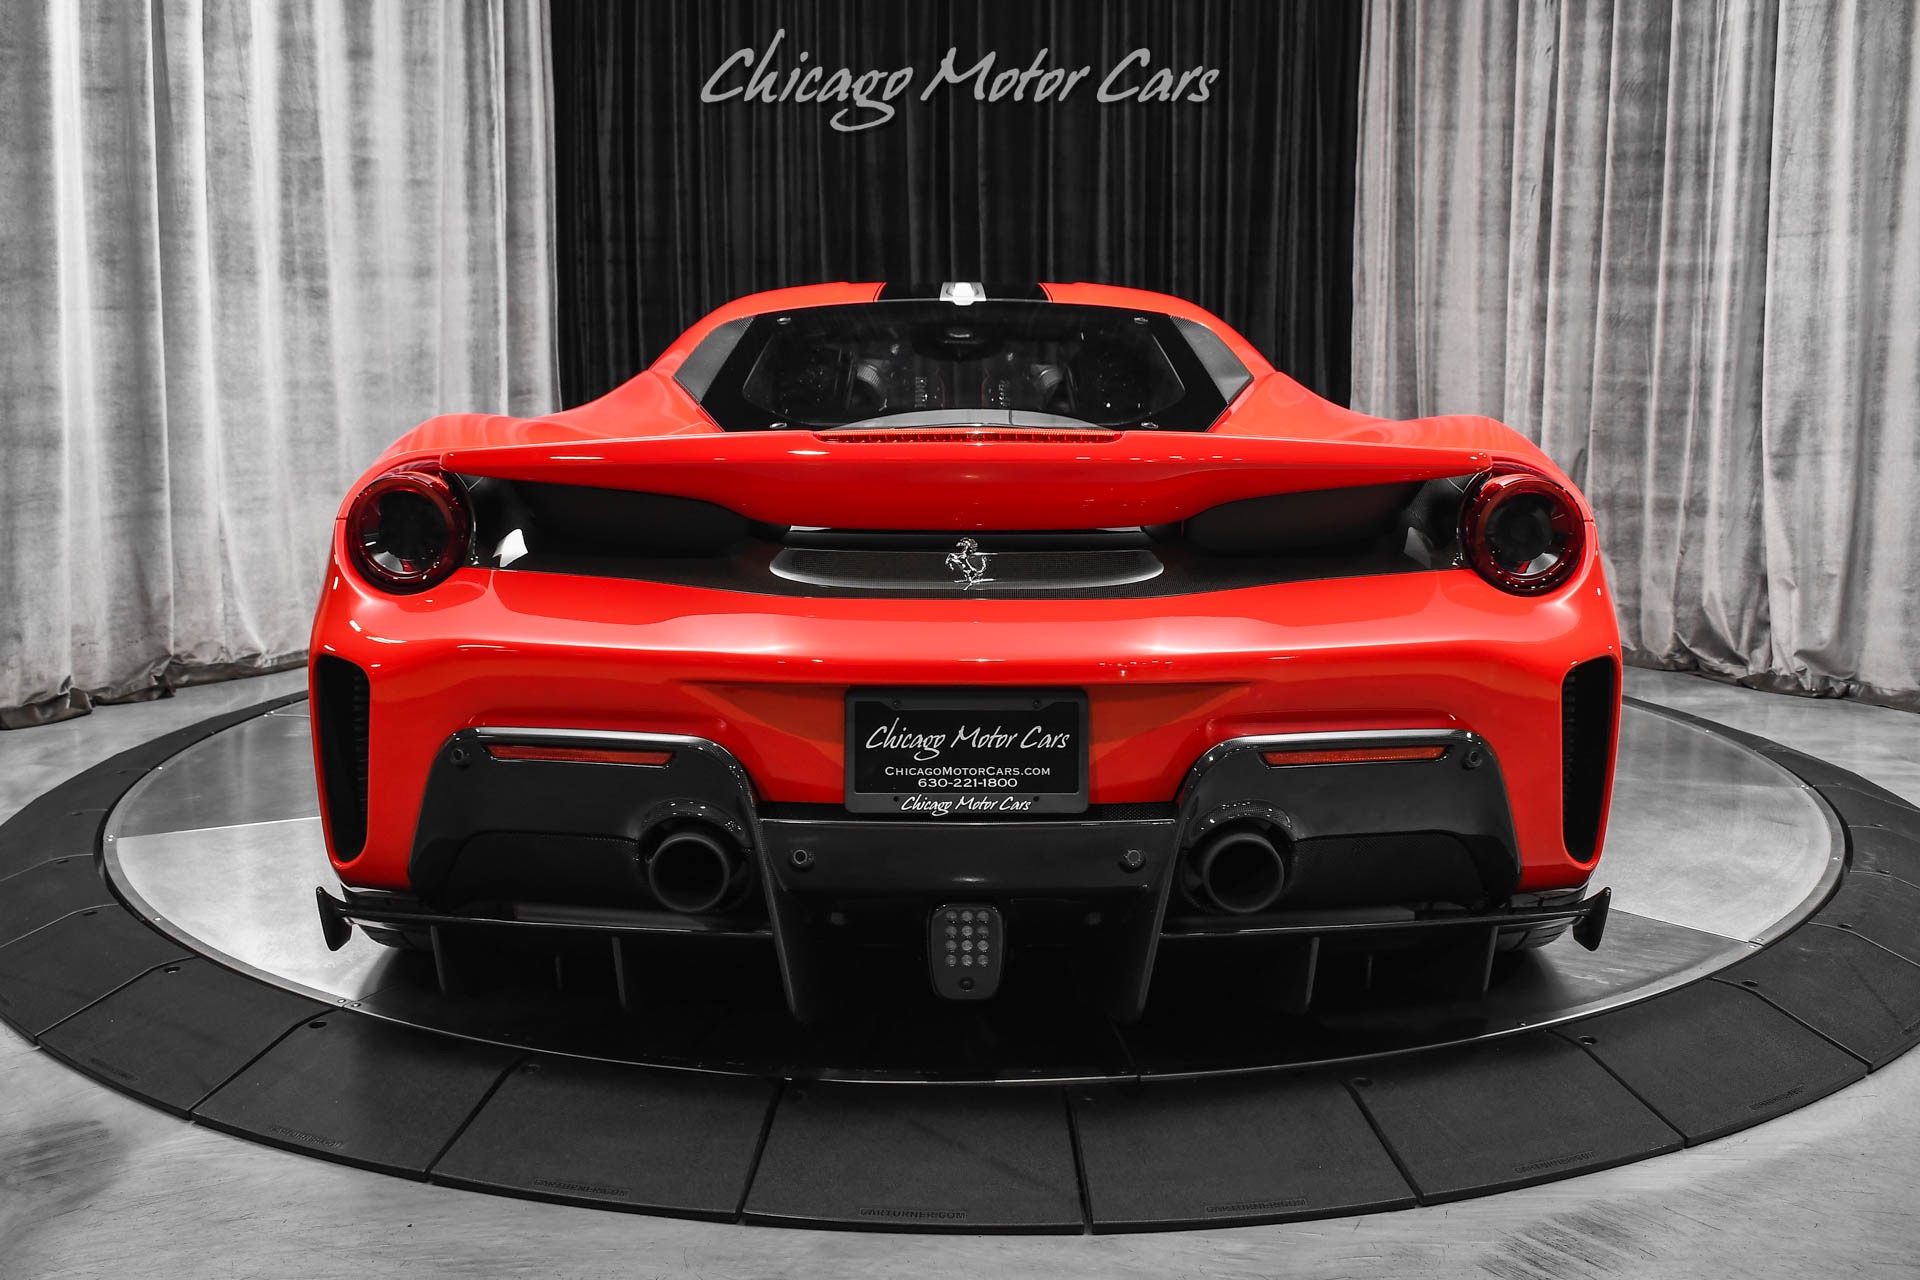 Used-2019-Ferrari-488-Pista-Coupe-ONLY-3k-Miles-HRE-Wheels-FULL-PPF-TONS-of-Carbon-123K-in-Option